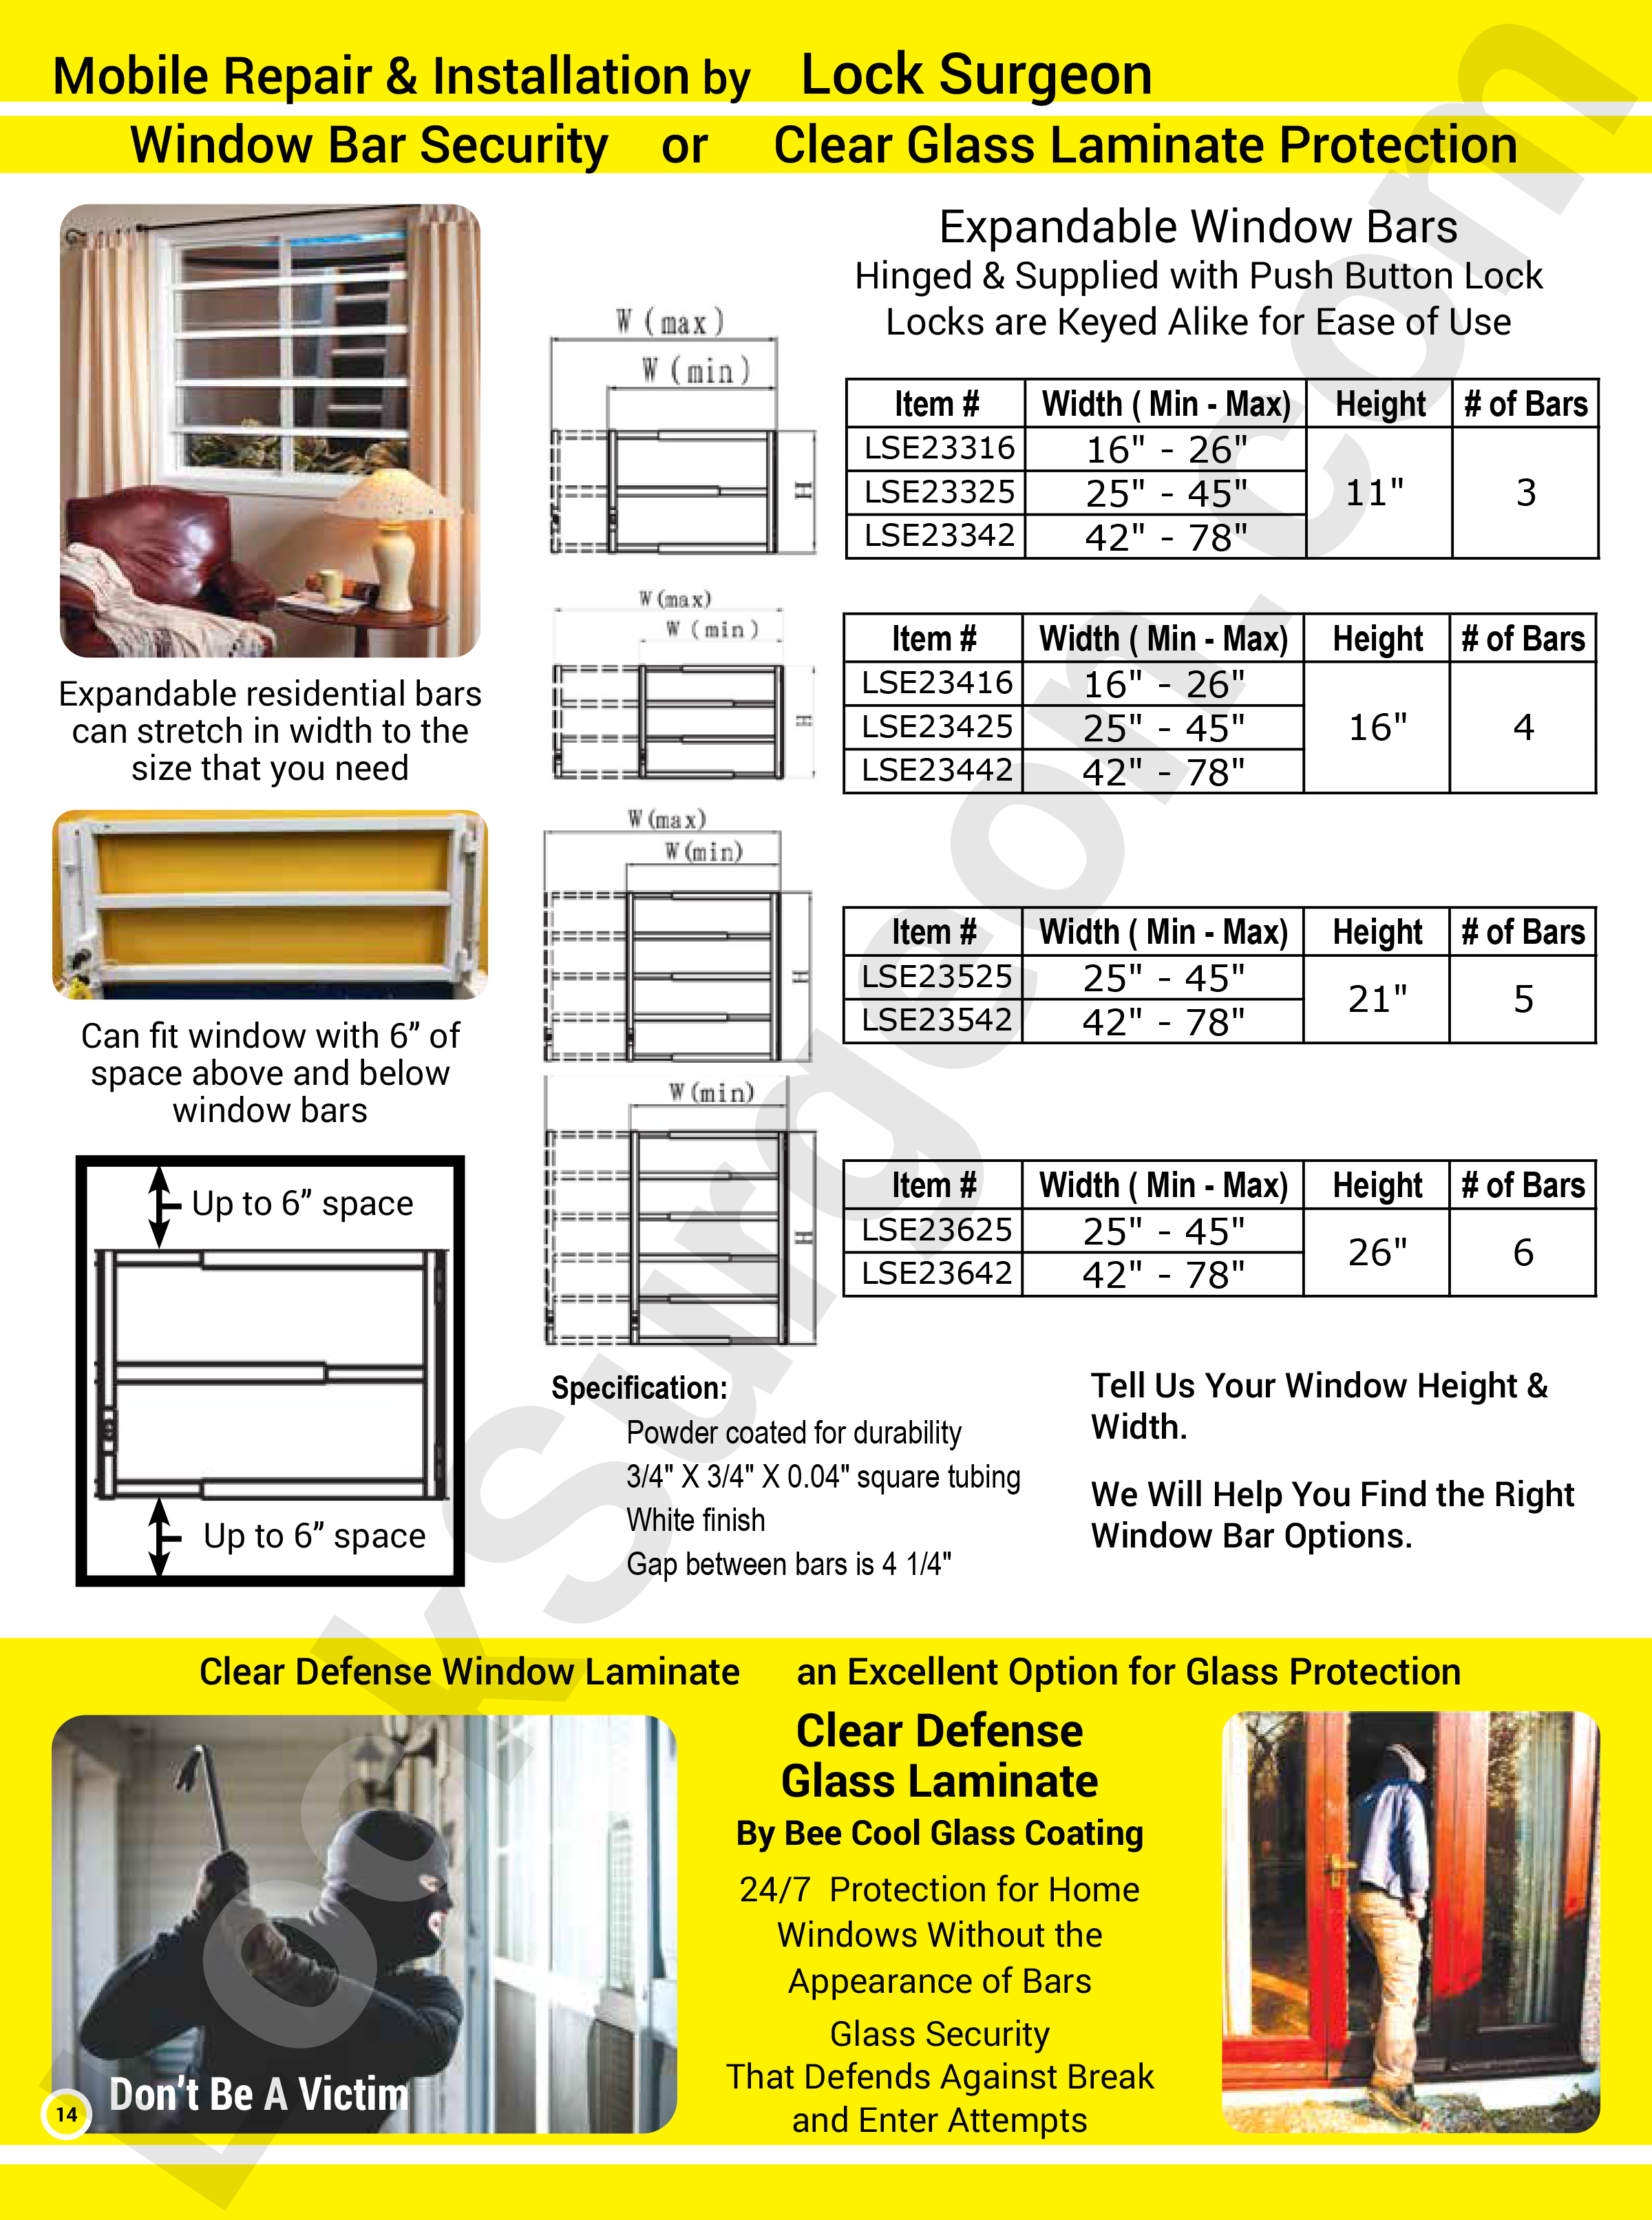 Lock Surgeon Edm South window bar security clear glass laminate protection for flat glass surfaces.